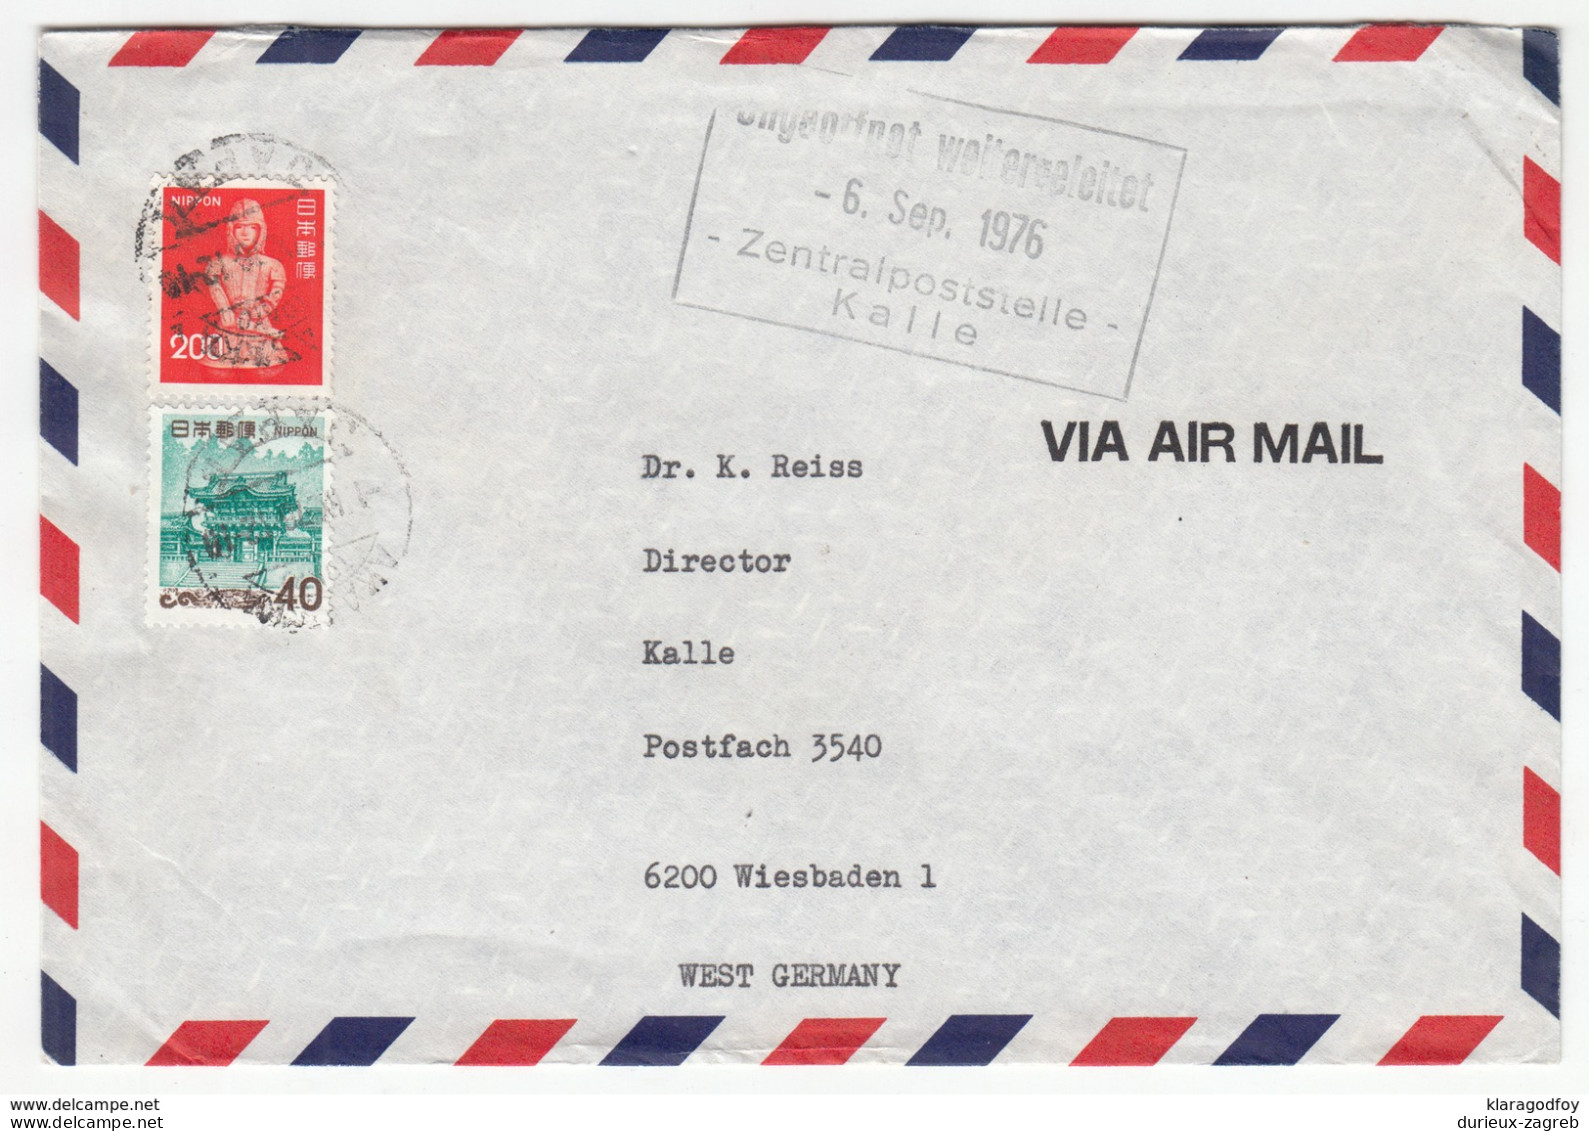 Japan, Hoechst Japan Company Airmail Letter Cover Travelled 1976 Akasama Pmk B171025 - Covers & Documents